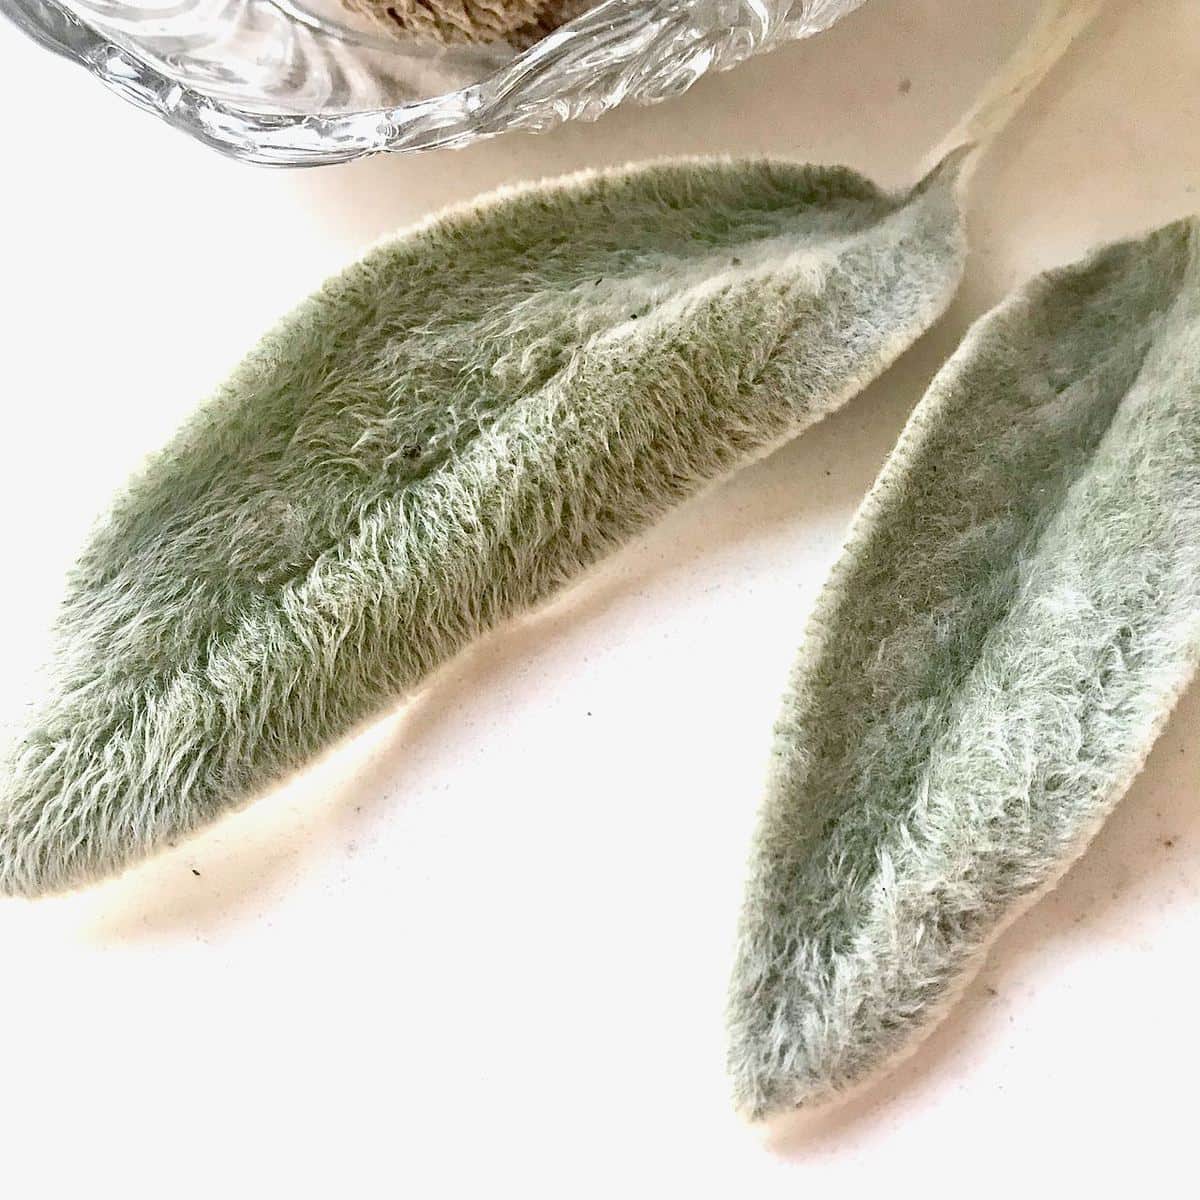 Two Lambs Ear Leaves on quartz counter